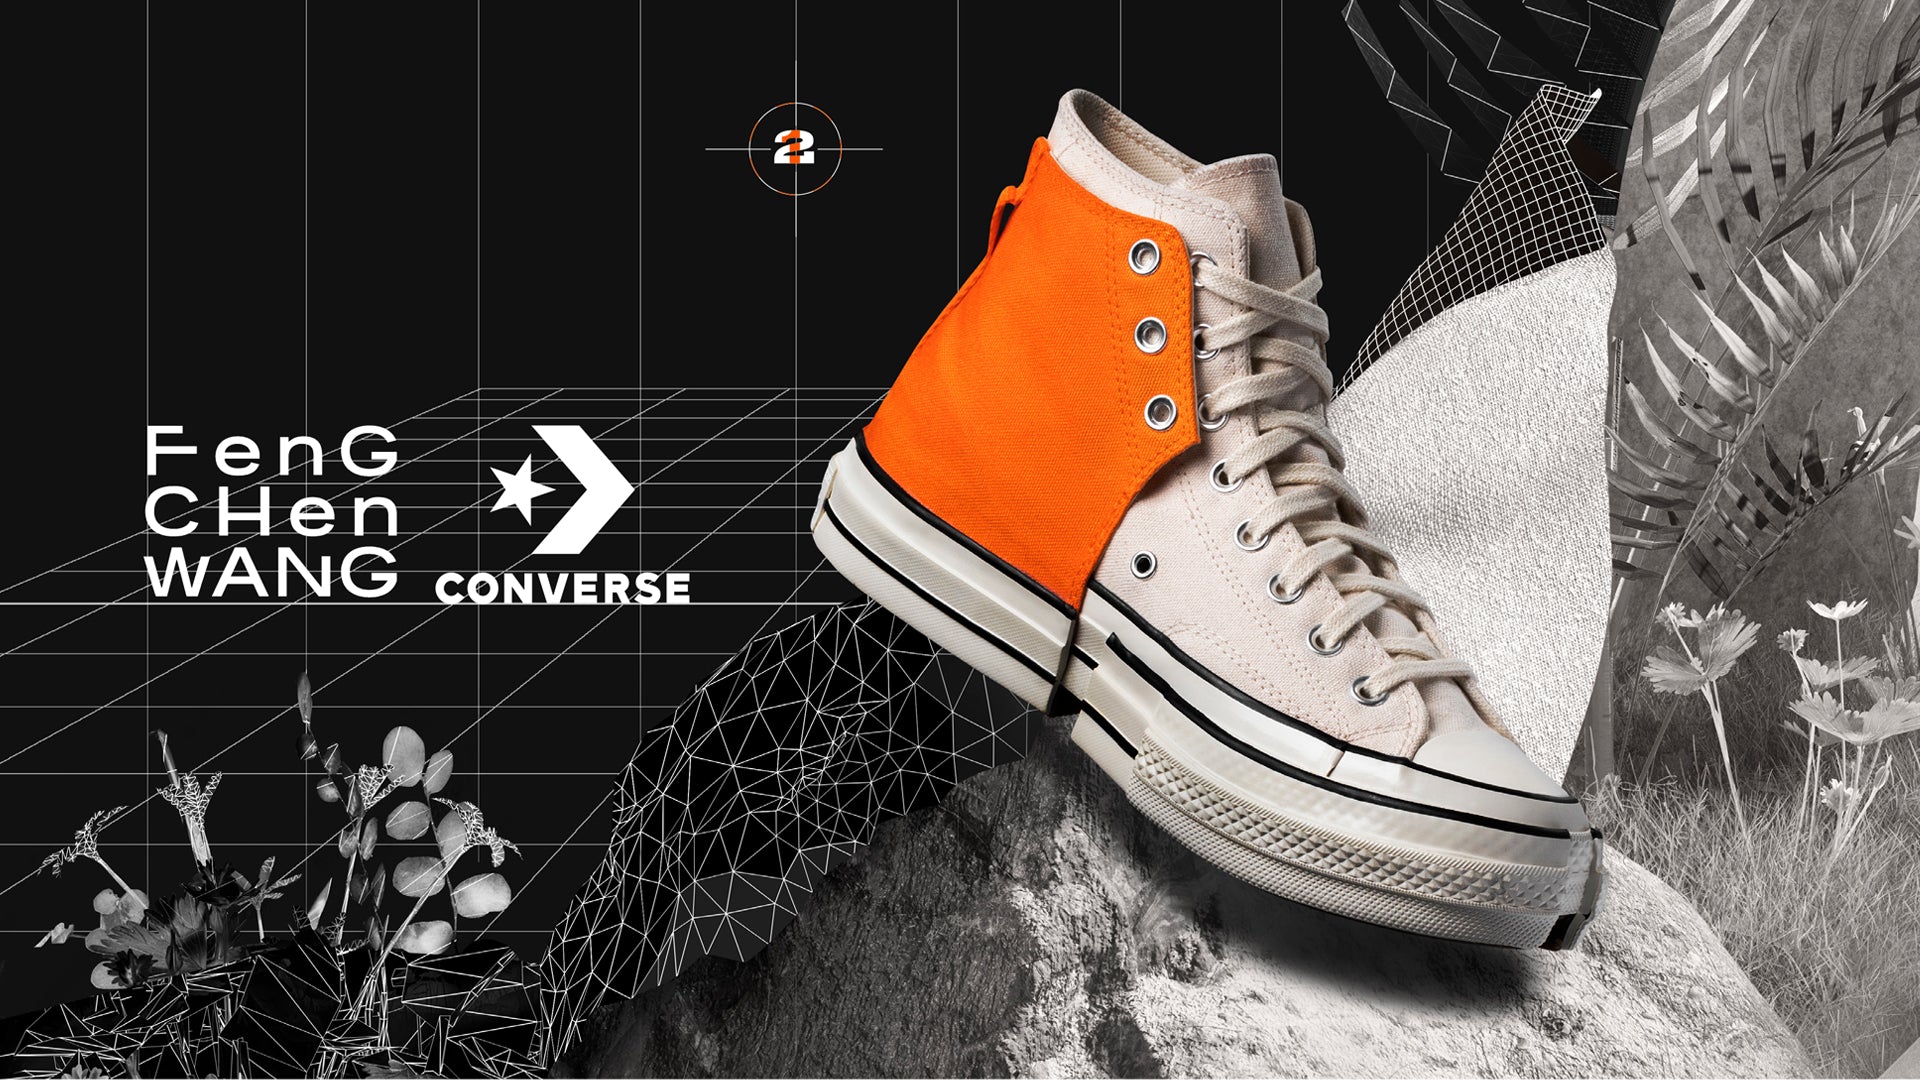 Converse x Feng Chen High Concept 2-in-1 CROSSOVER